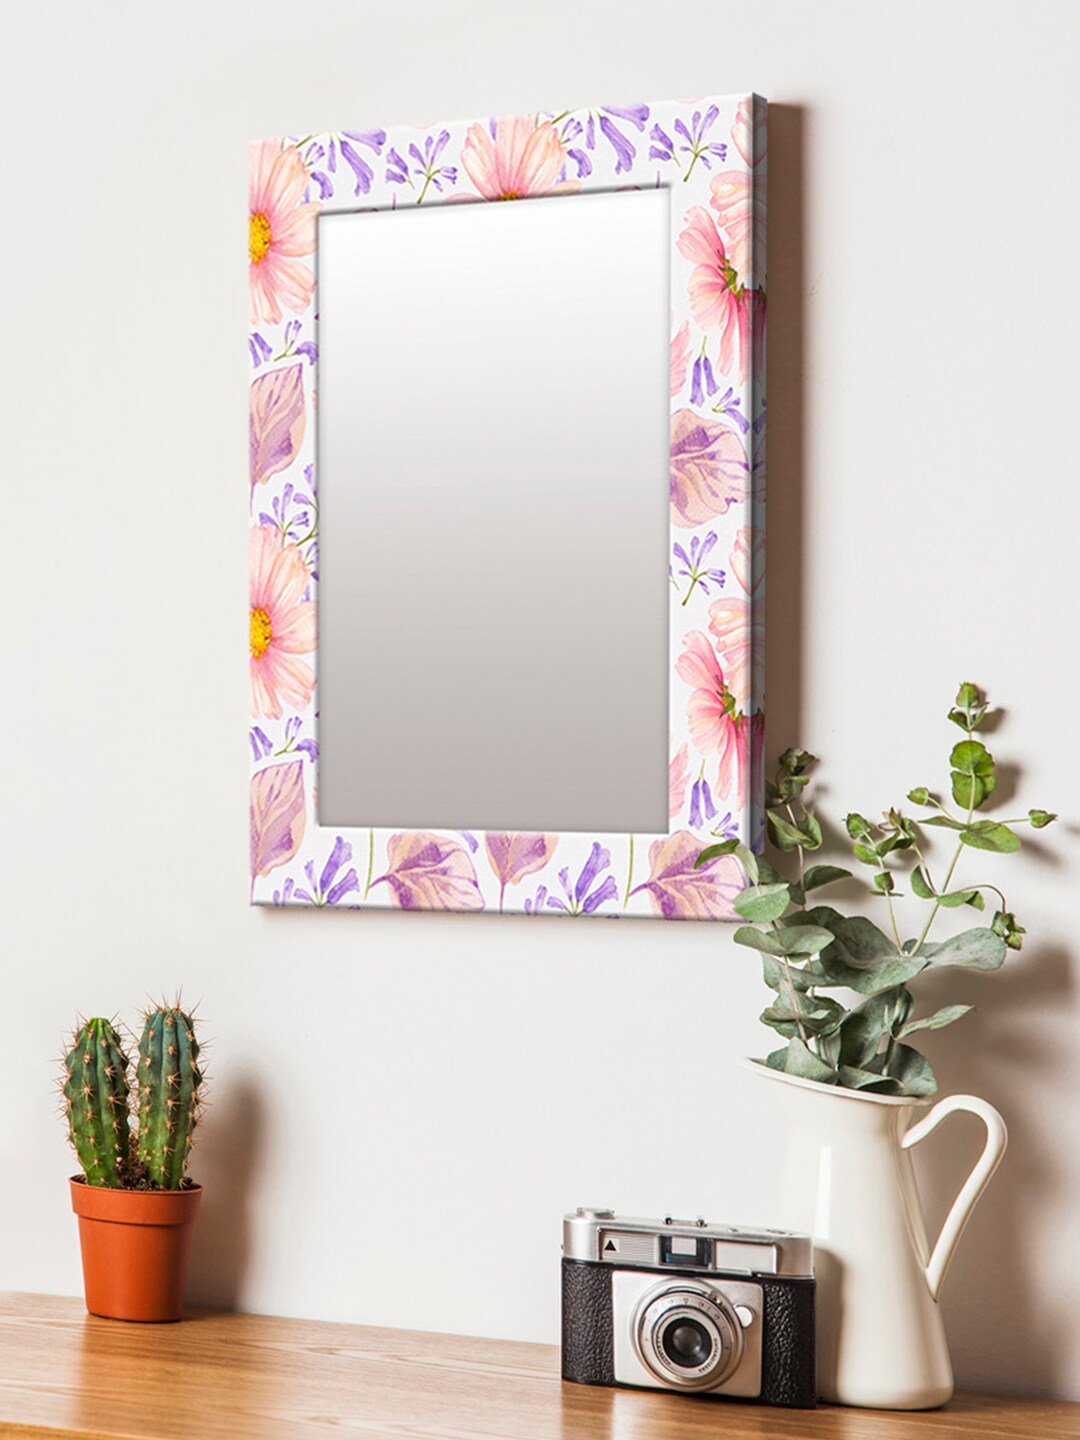 999Store Pink & Purple Printed MDF Wall Mirror Price in India